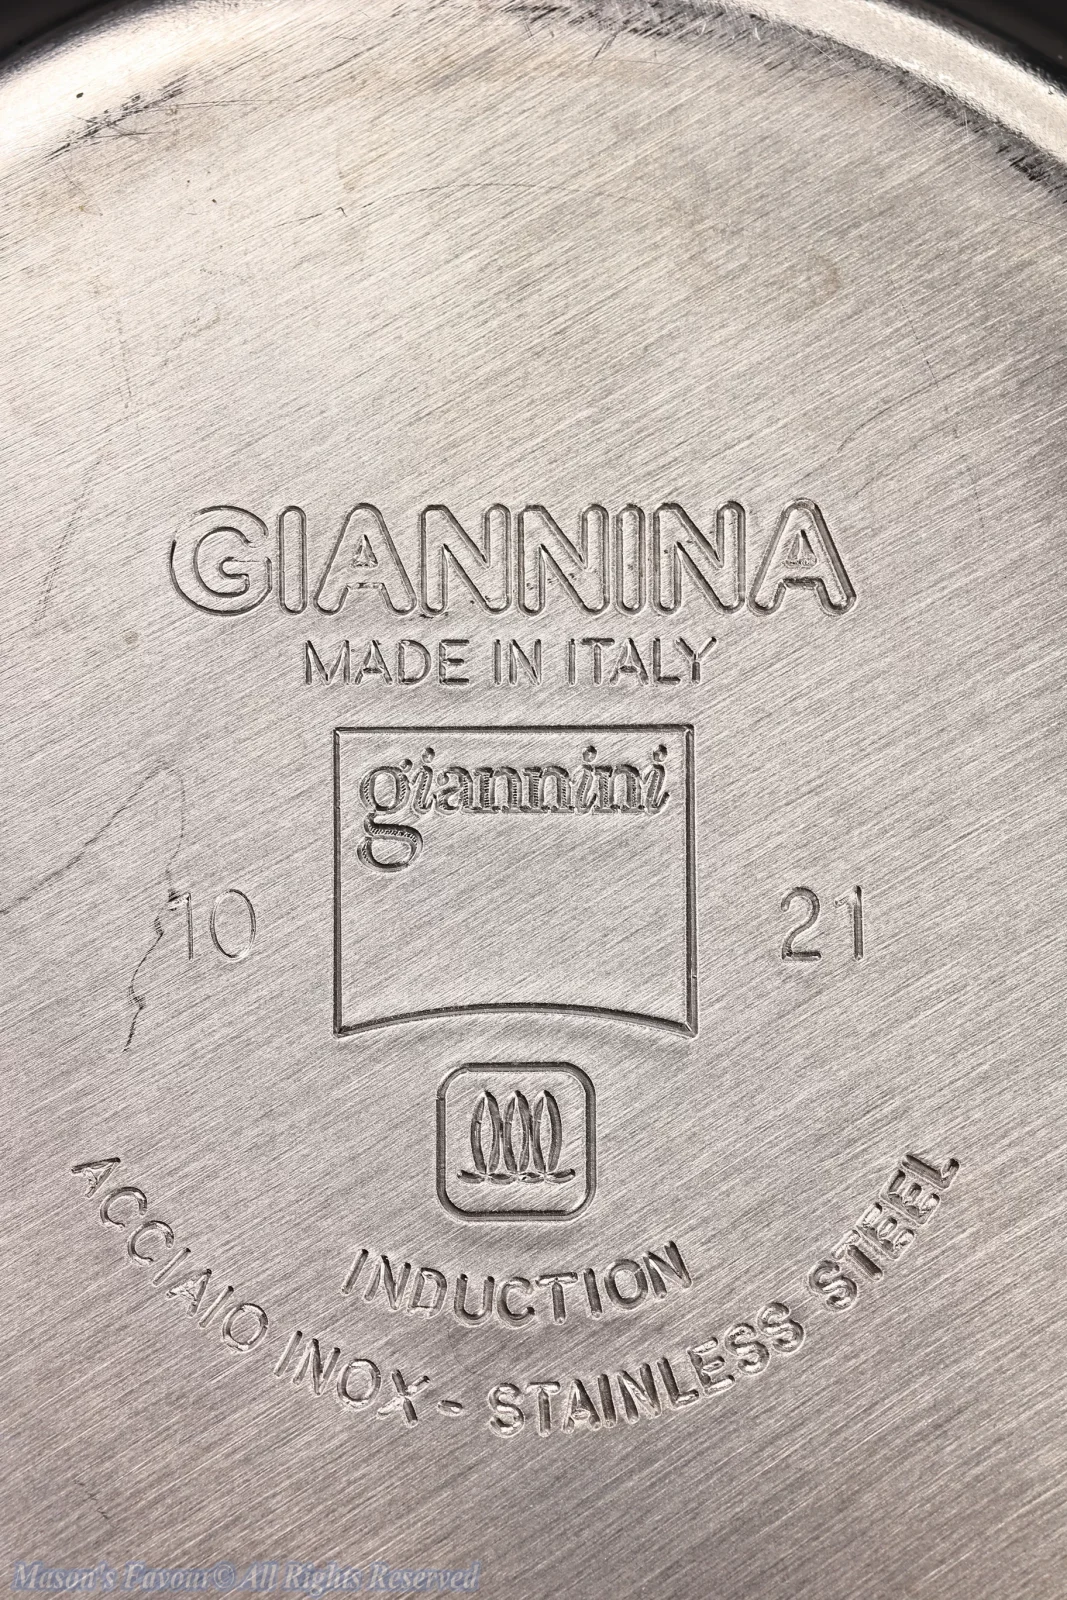 Giannini Restyling Moka Pot 6 Cups - Bottom Pot Part, Laser Engraving on the Bottom, Enlarged View